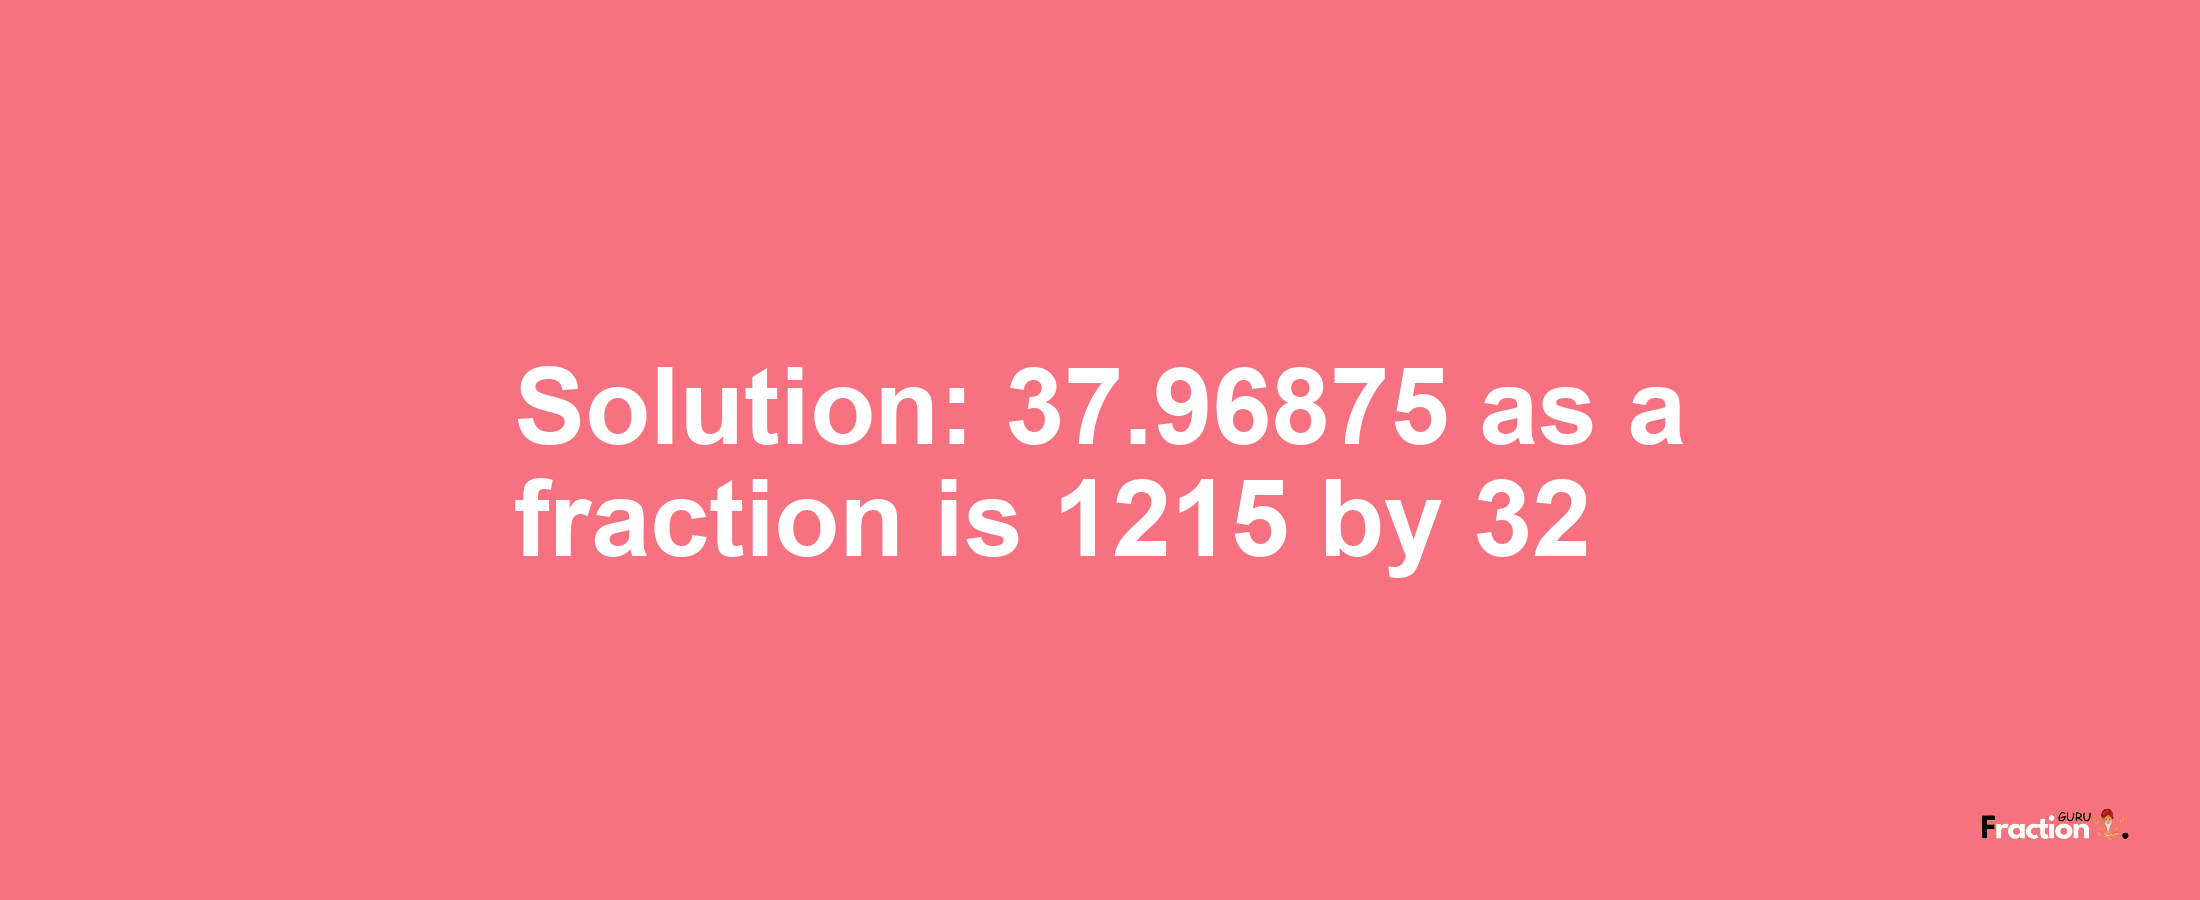 Solution:37.96875 as a fraction is 1215/32